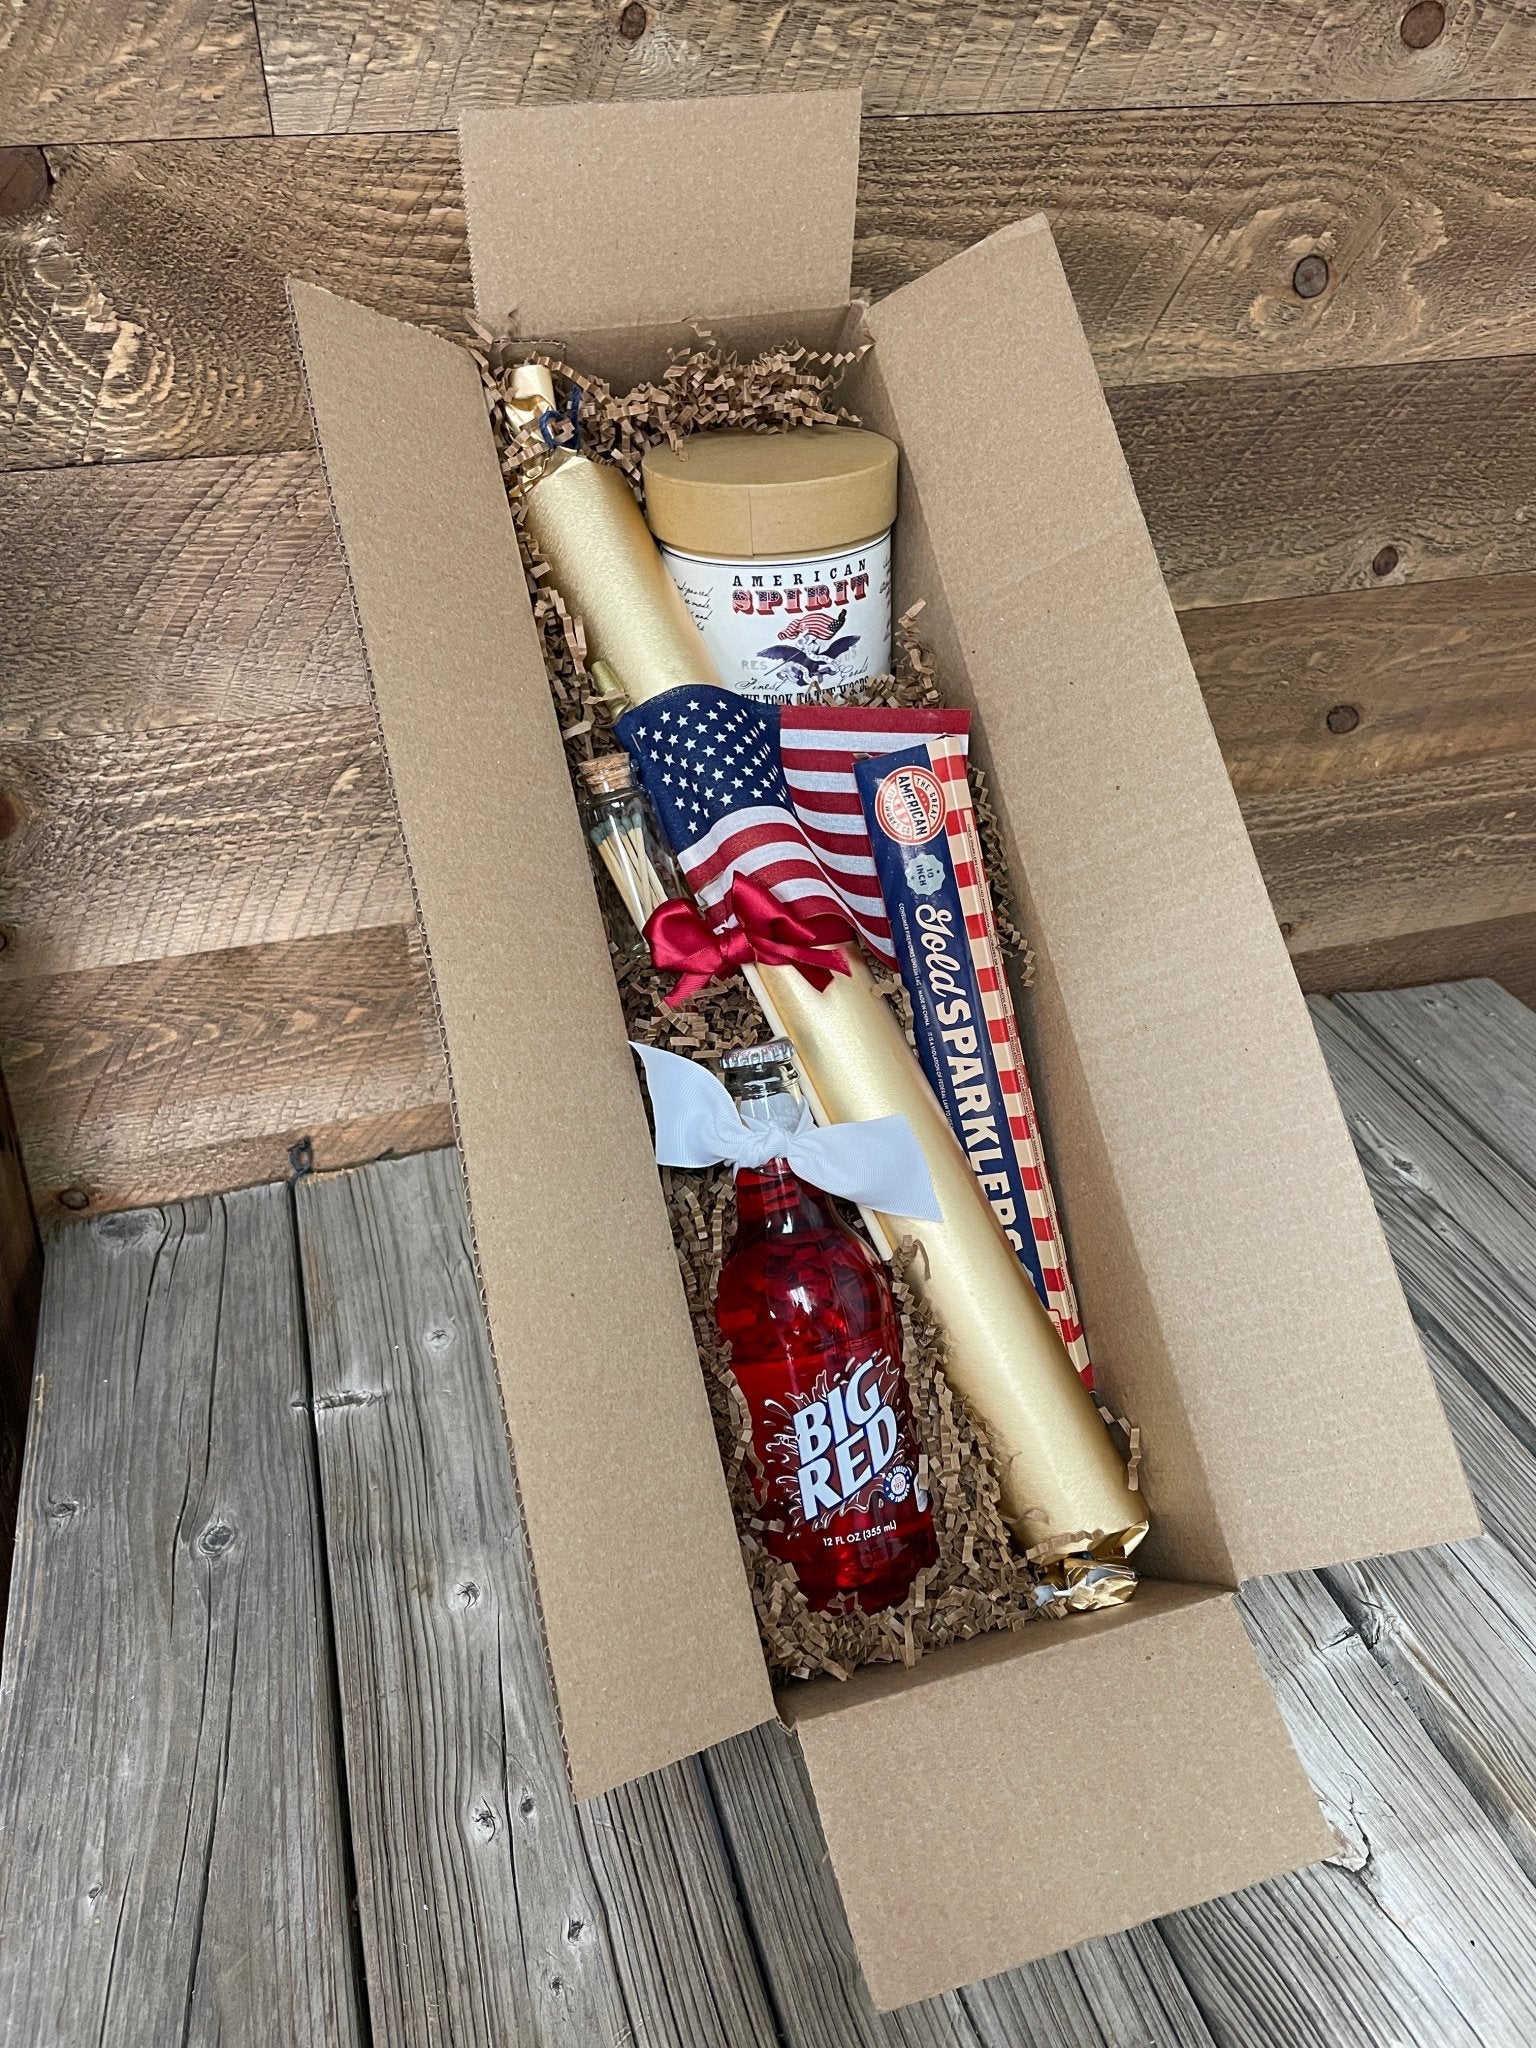 Patriotic Party Summertime Celebration for your 4th of July event! - Nifty Package Co